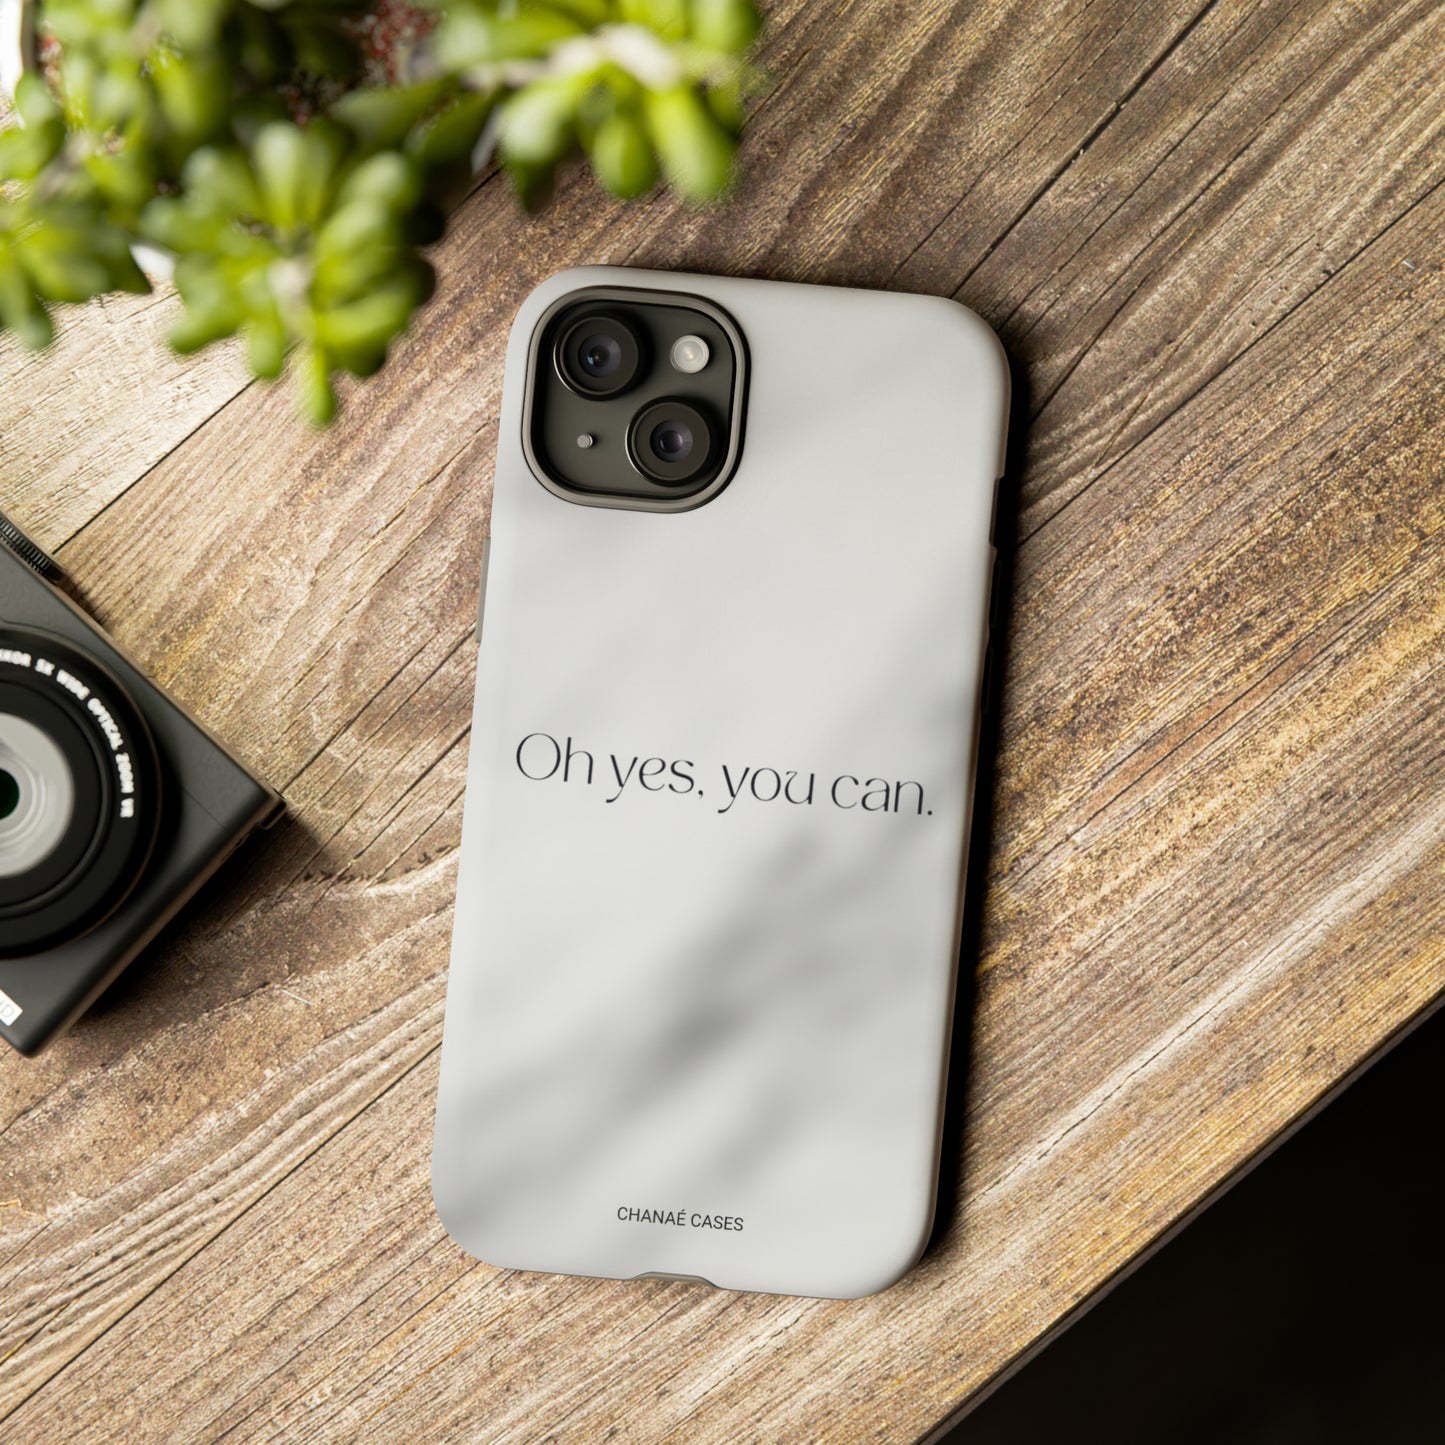 Yes You Can! Marble iPhone "Tough" Case (Grey)